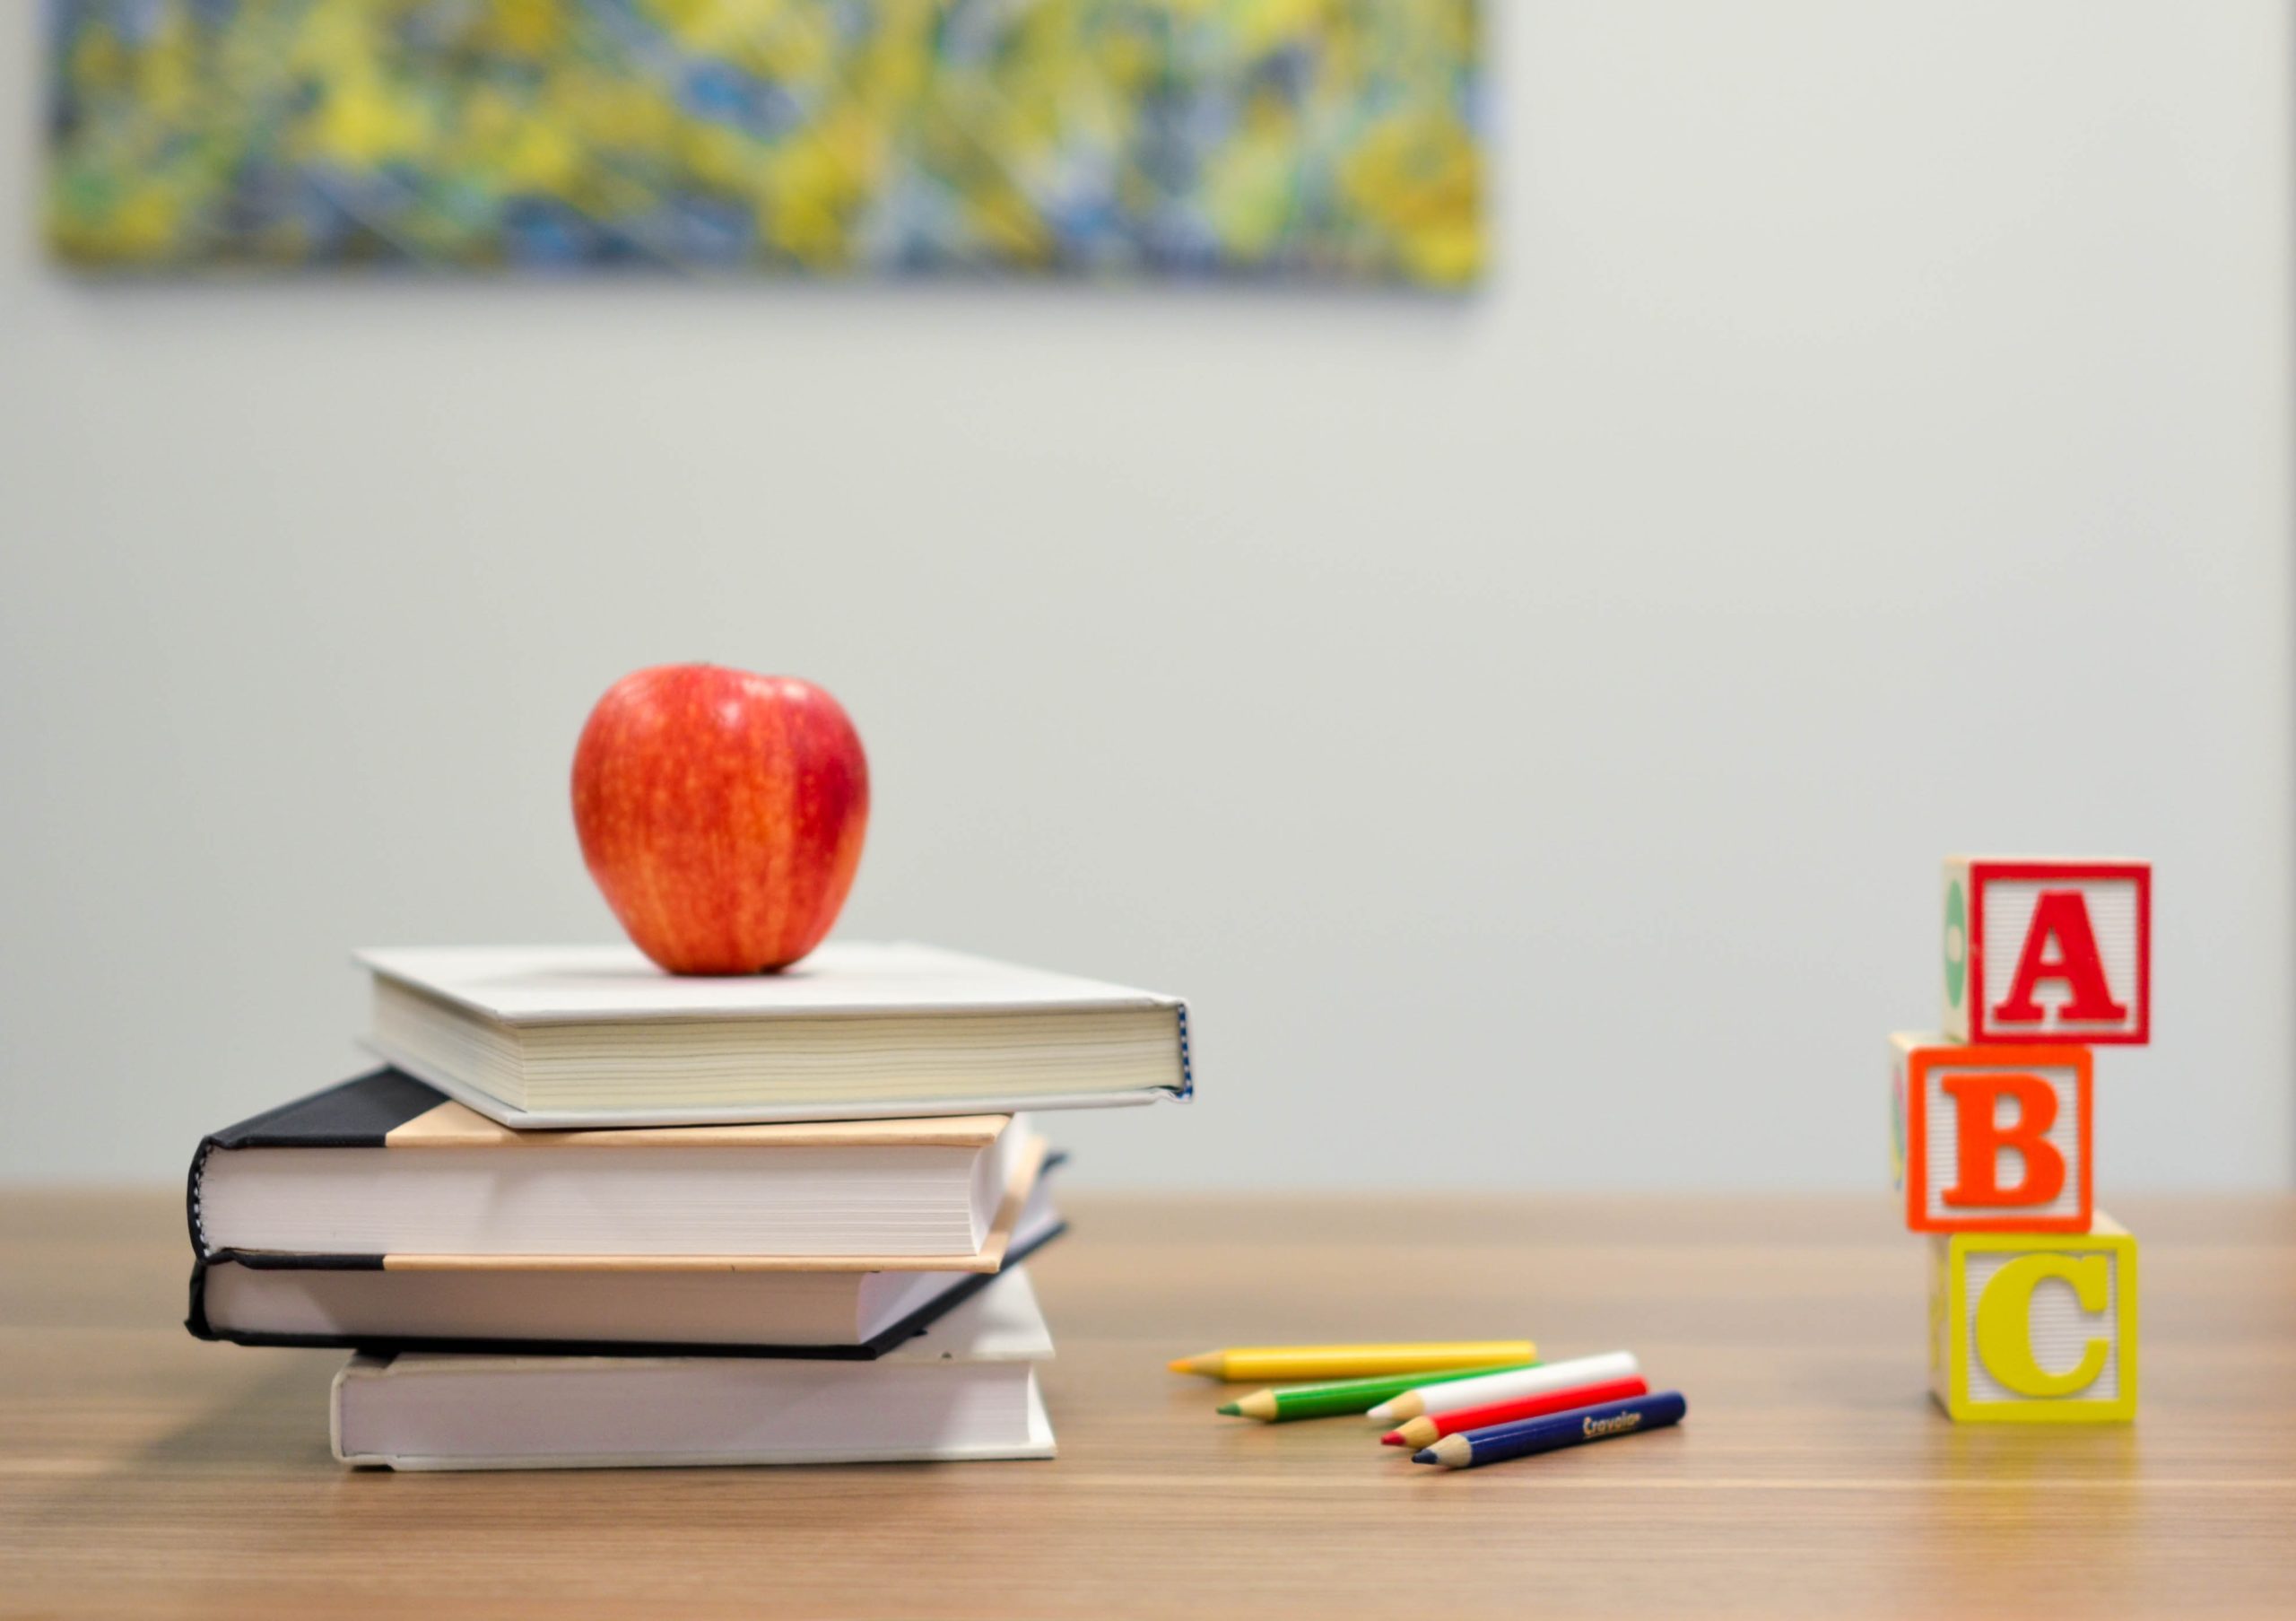 an apple on a stack of books on a classroom desk with colored pencils and alphabet blocks